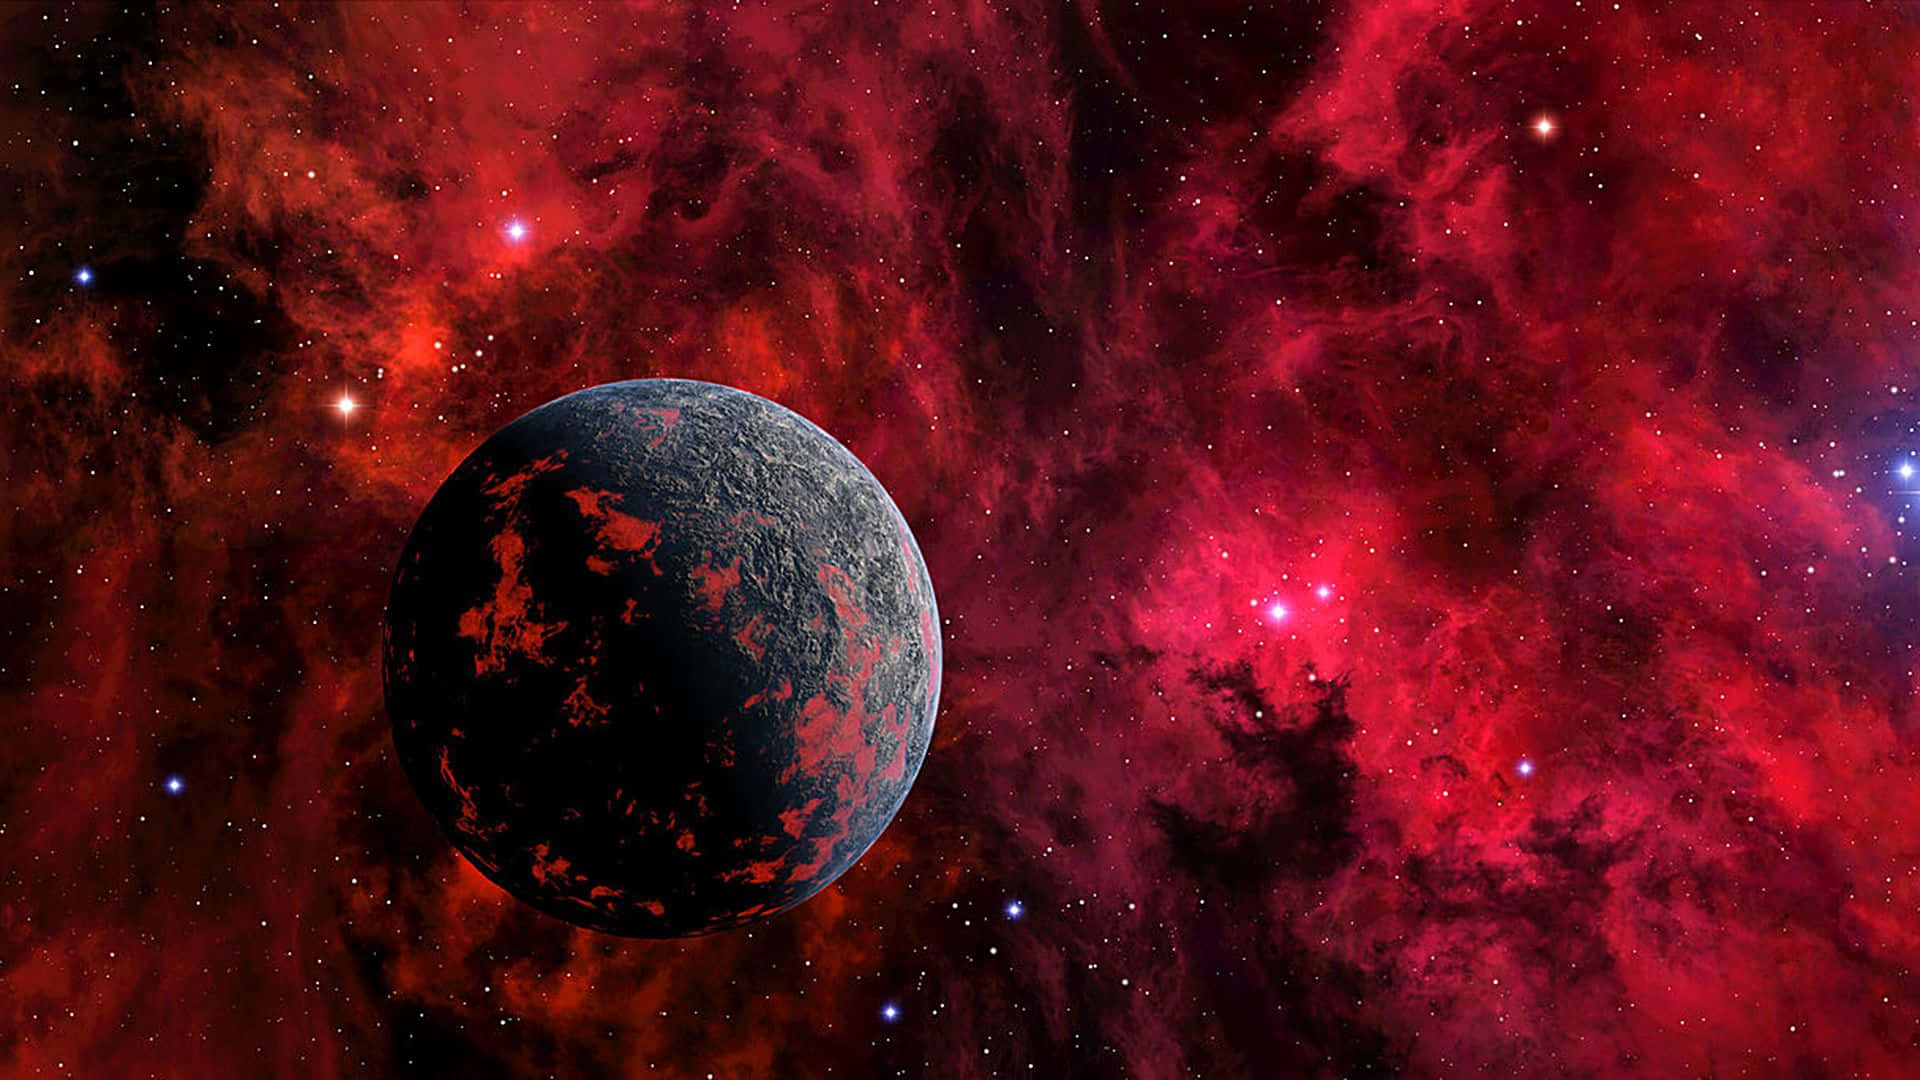 A Planet In Space With Red And Blue Stars